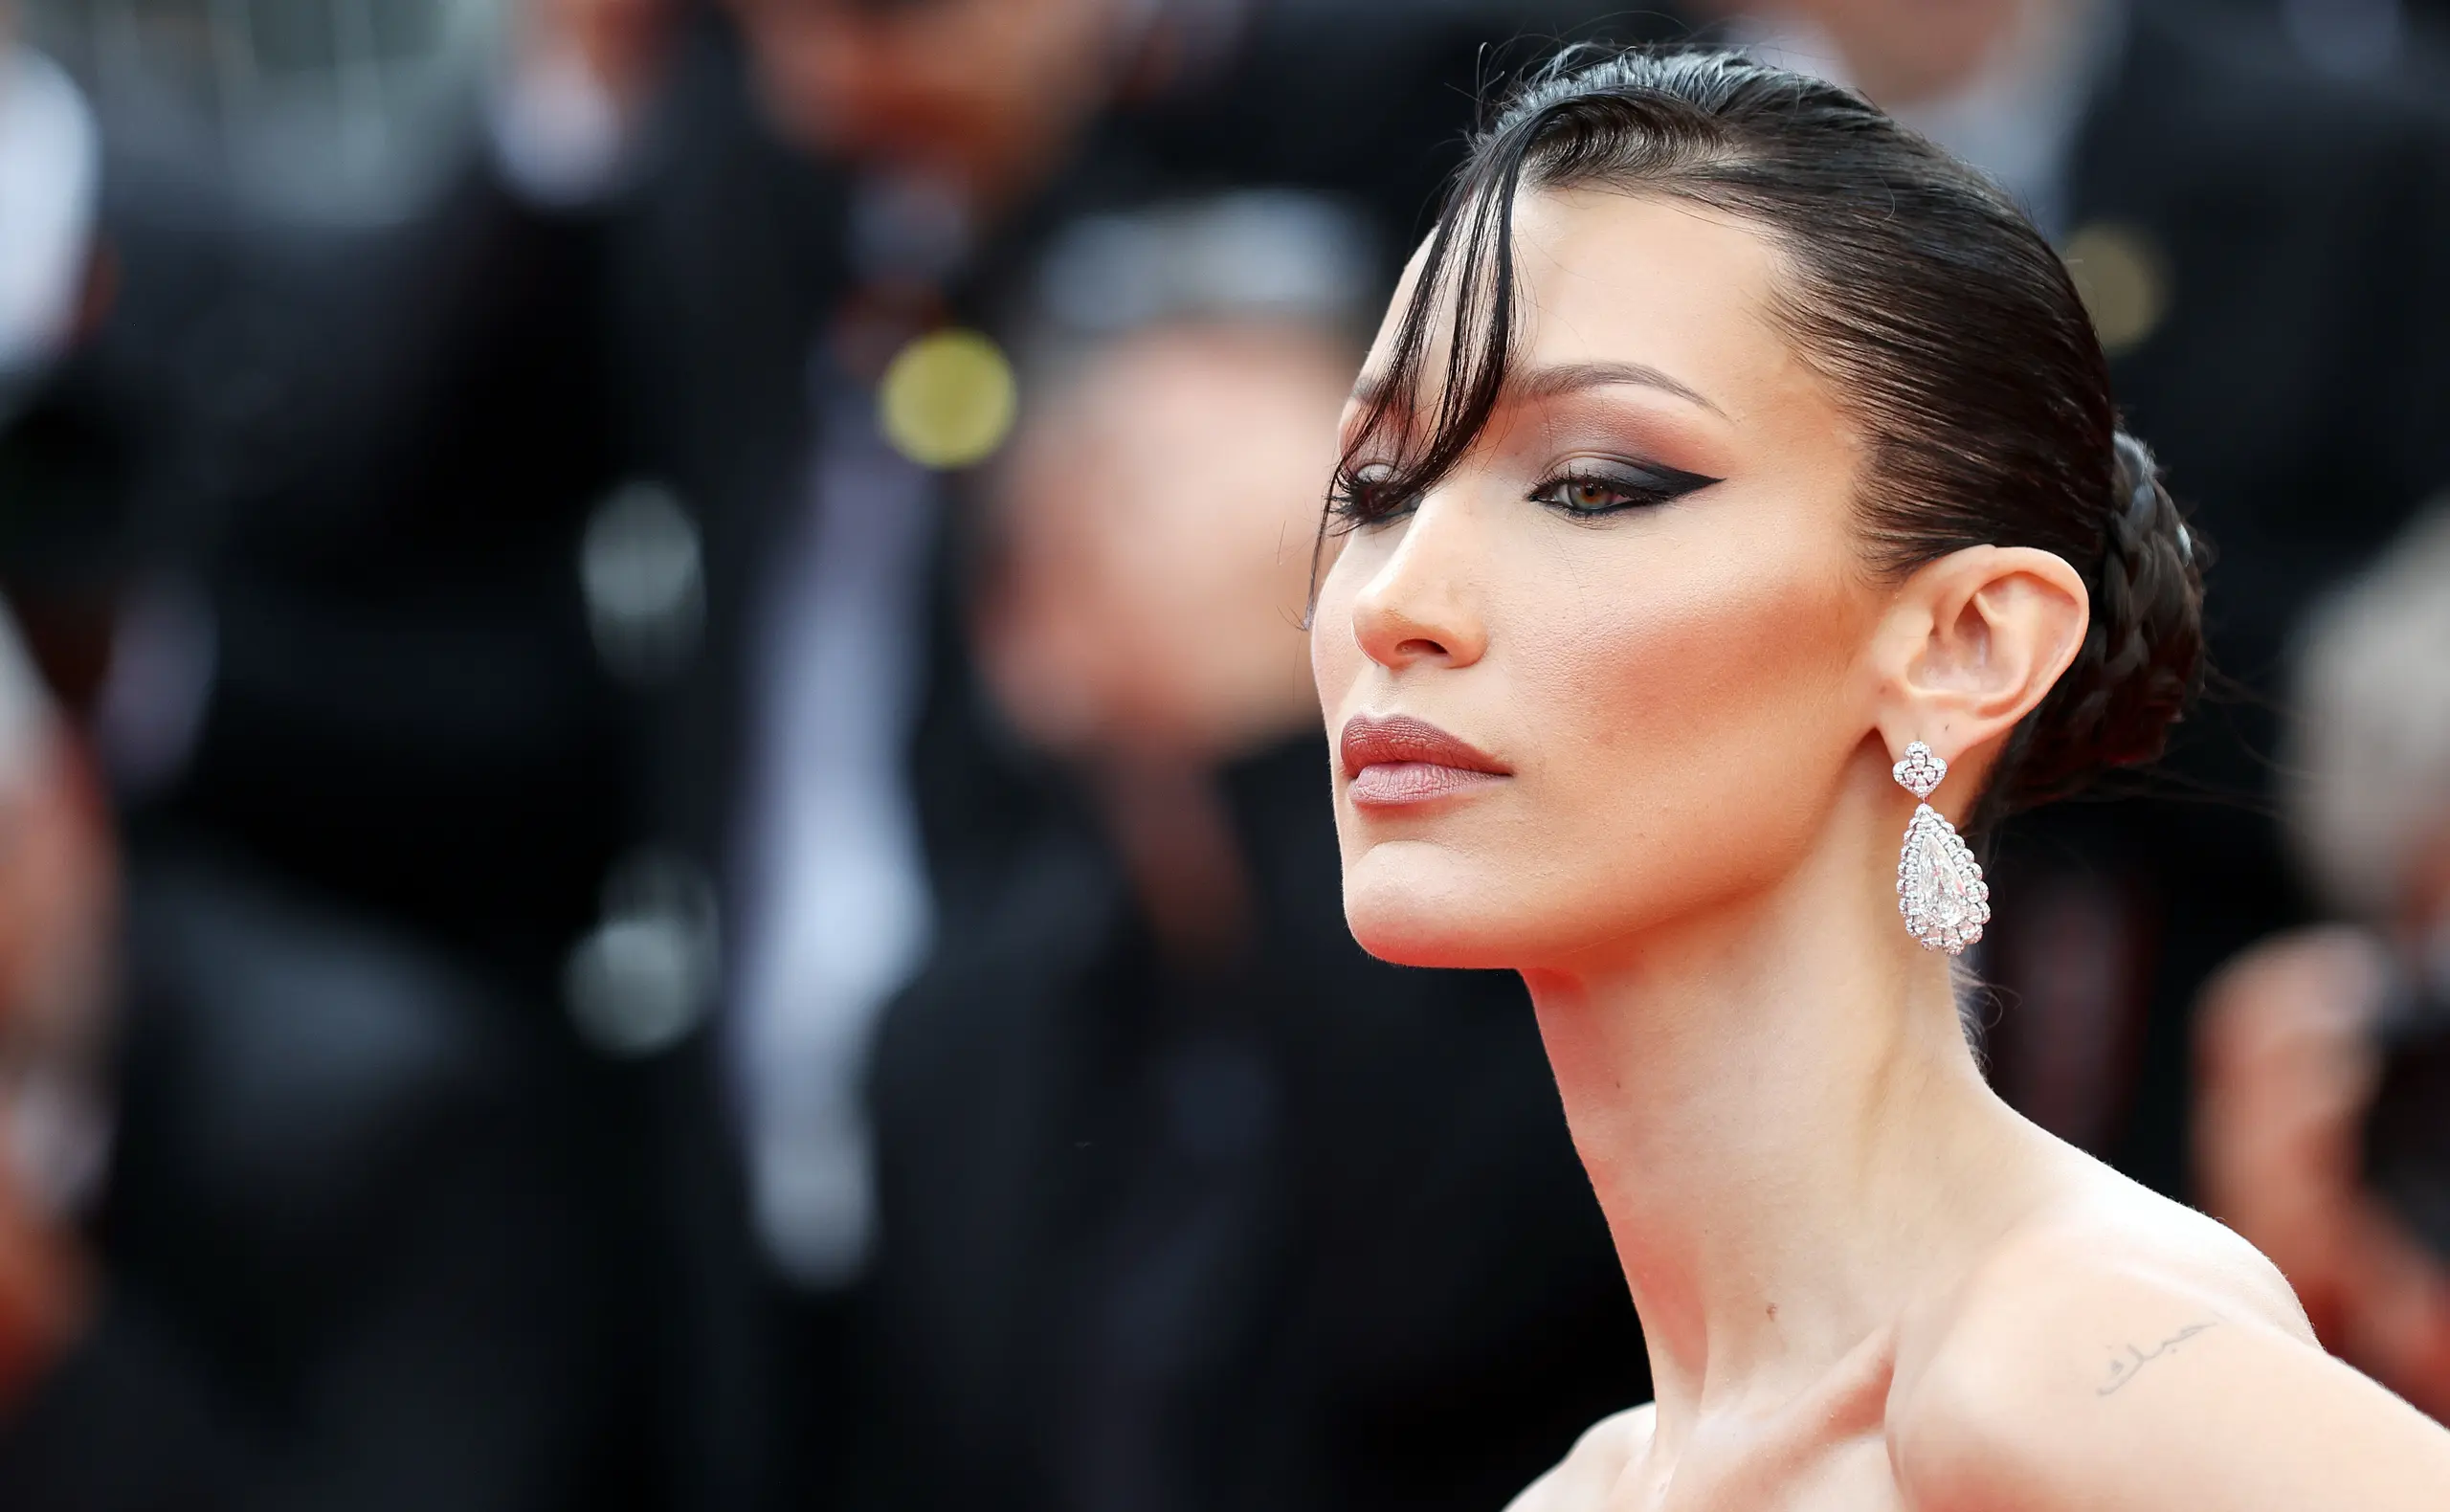 Bella Hadid am roten Teppich in Cannes 2022.